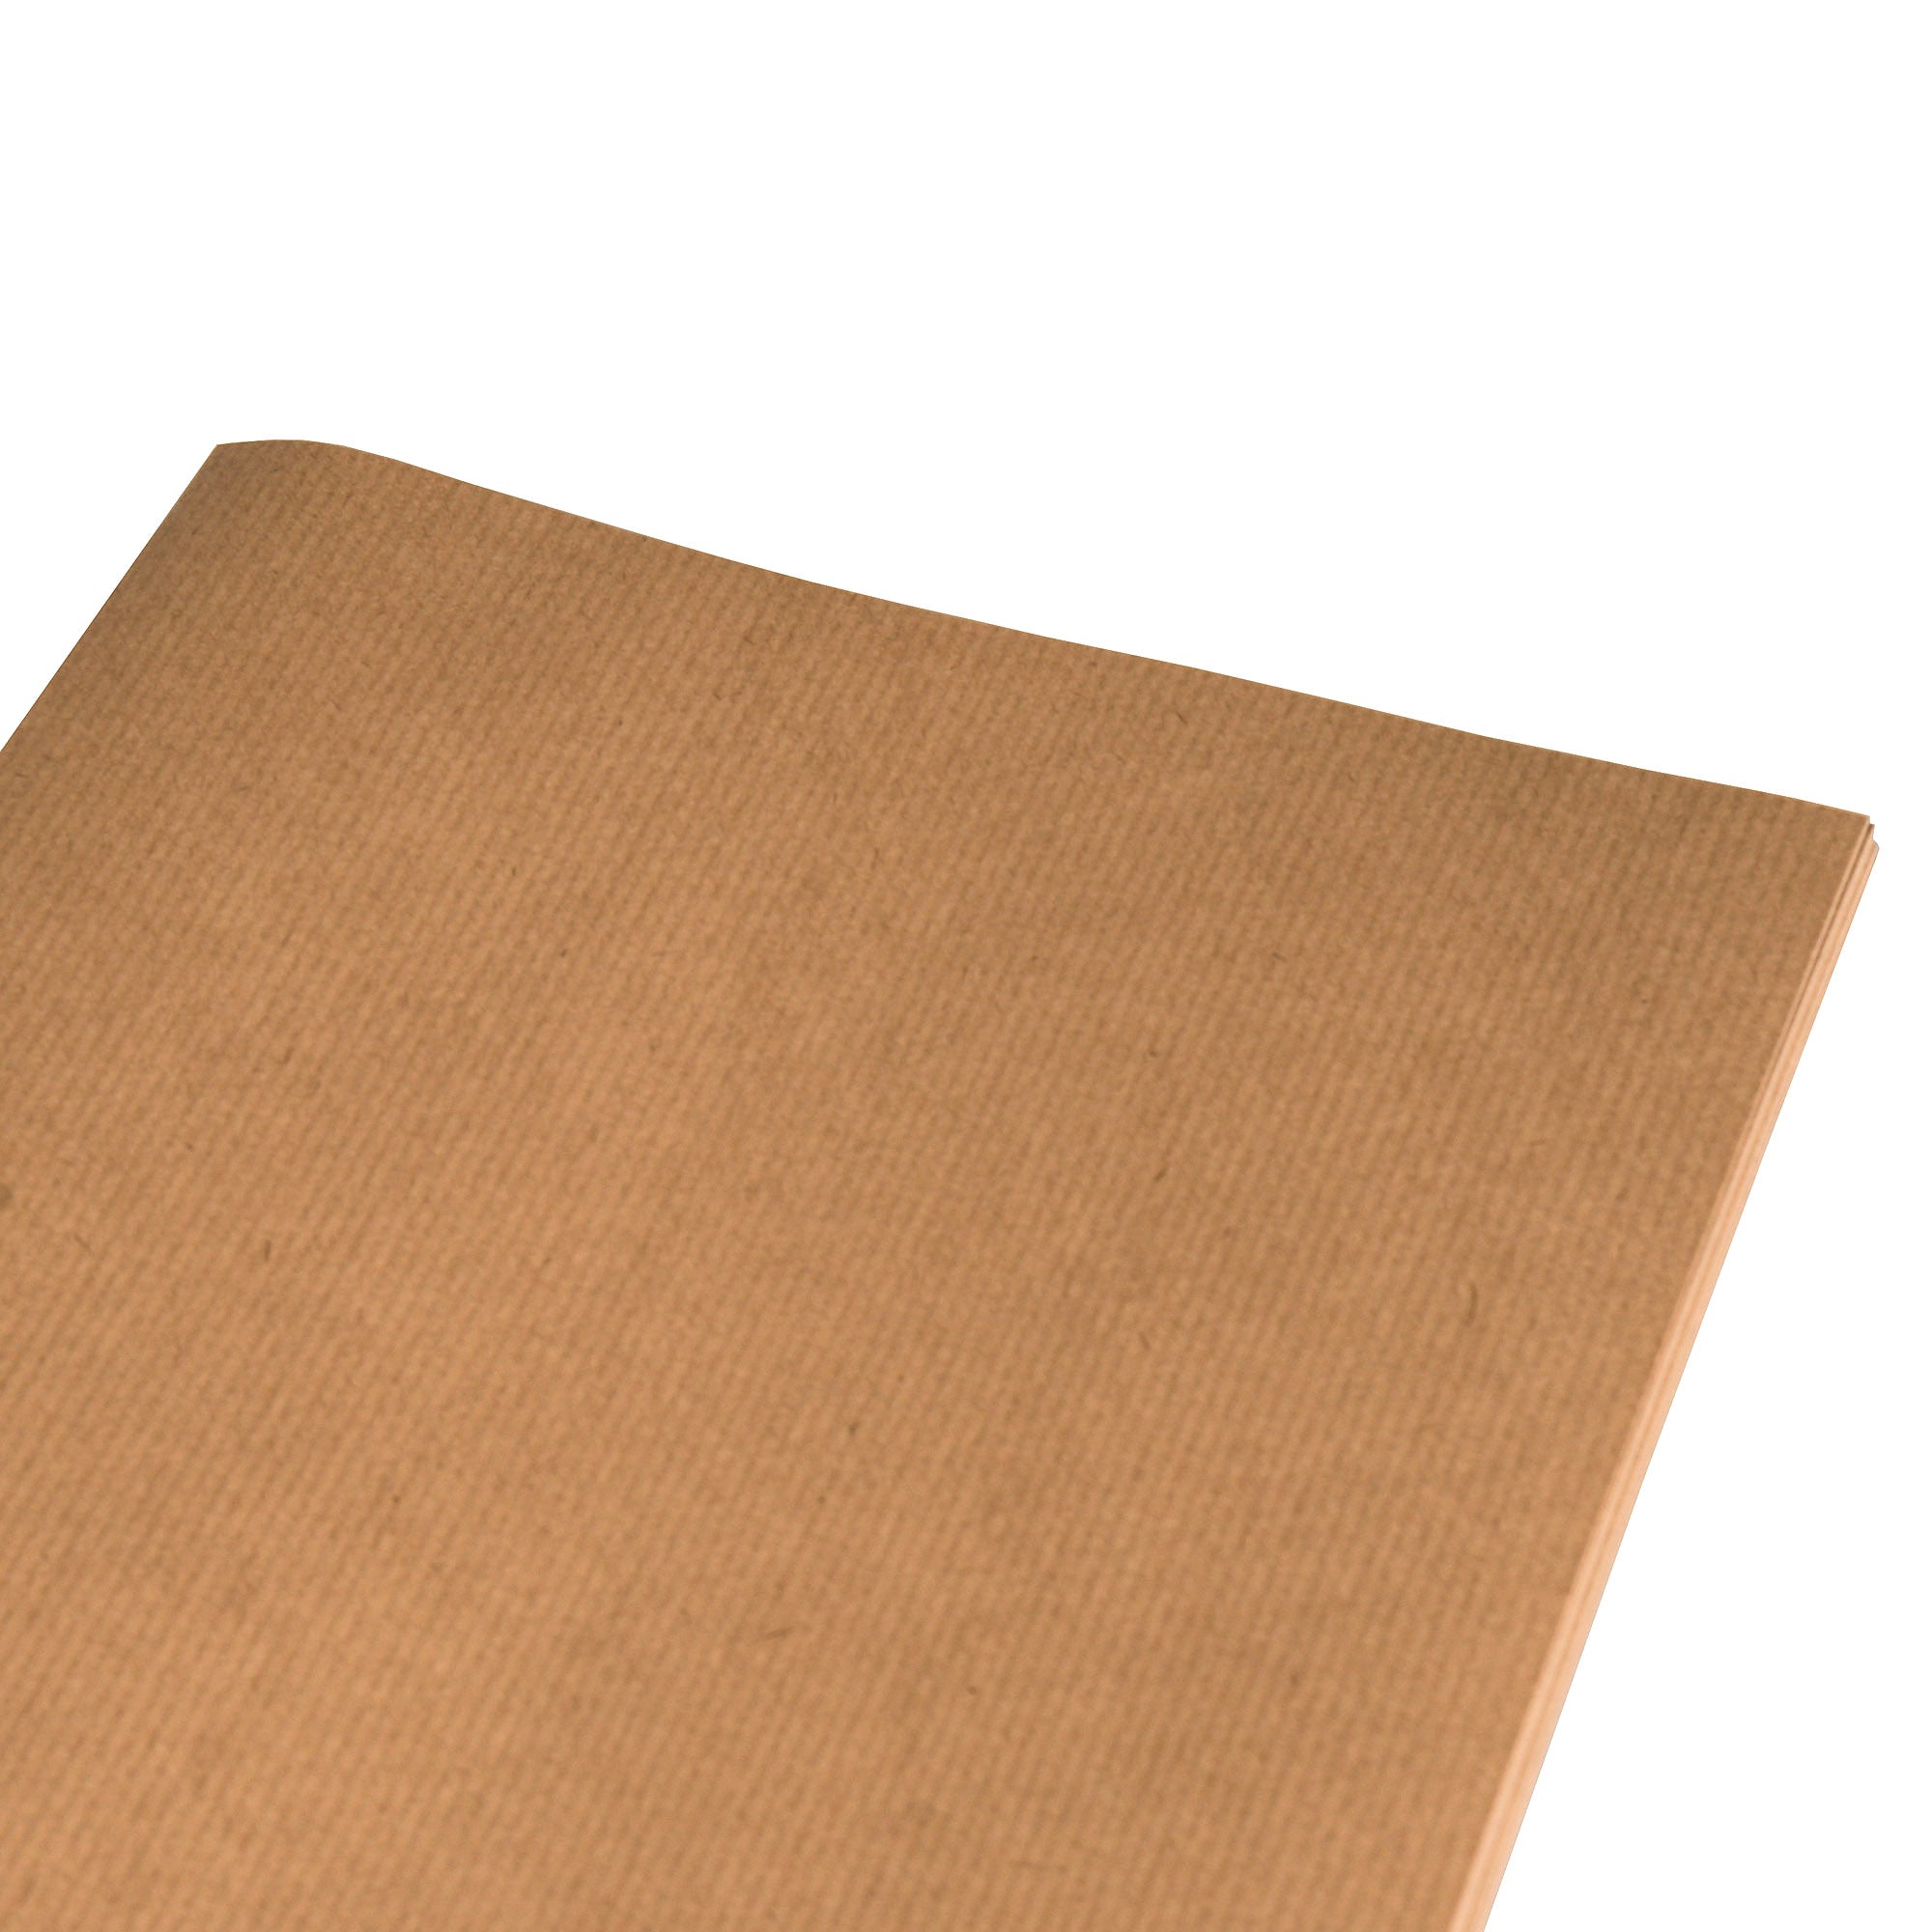 Self-adhesive kraft paper A4 210x297mm 50 sheets ribbed paper - MD Labels